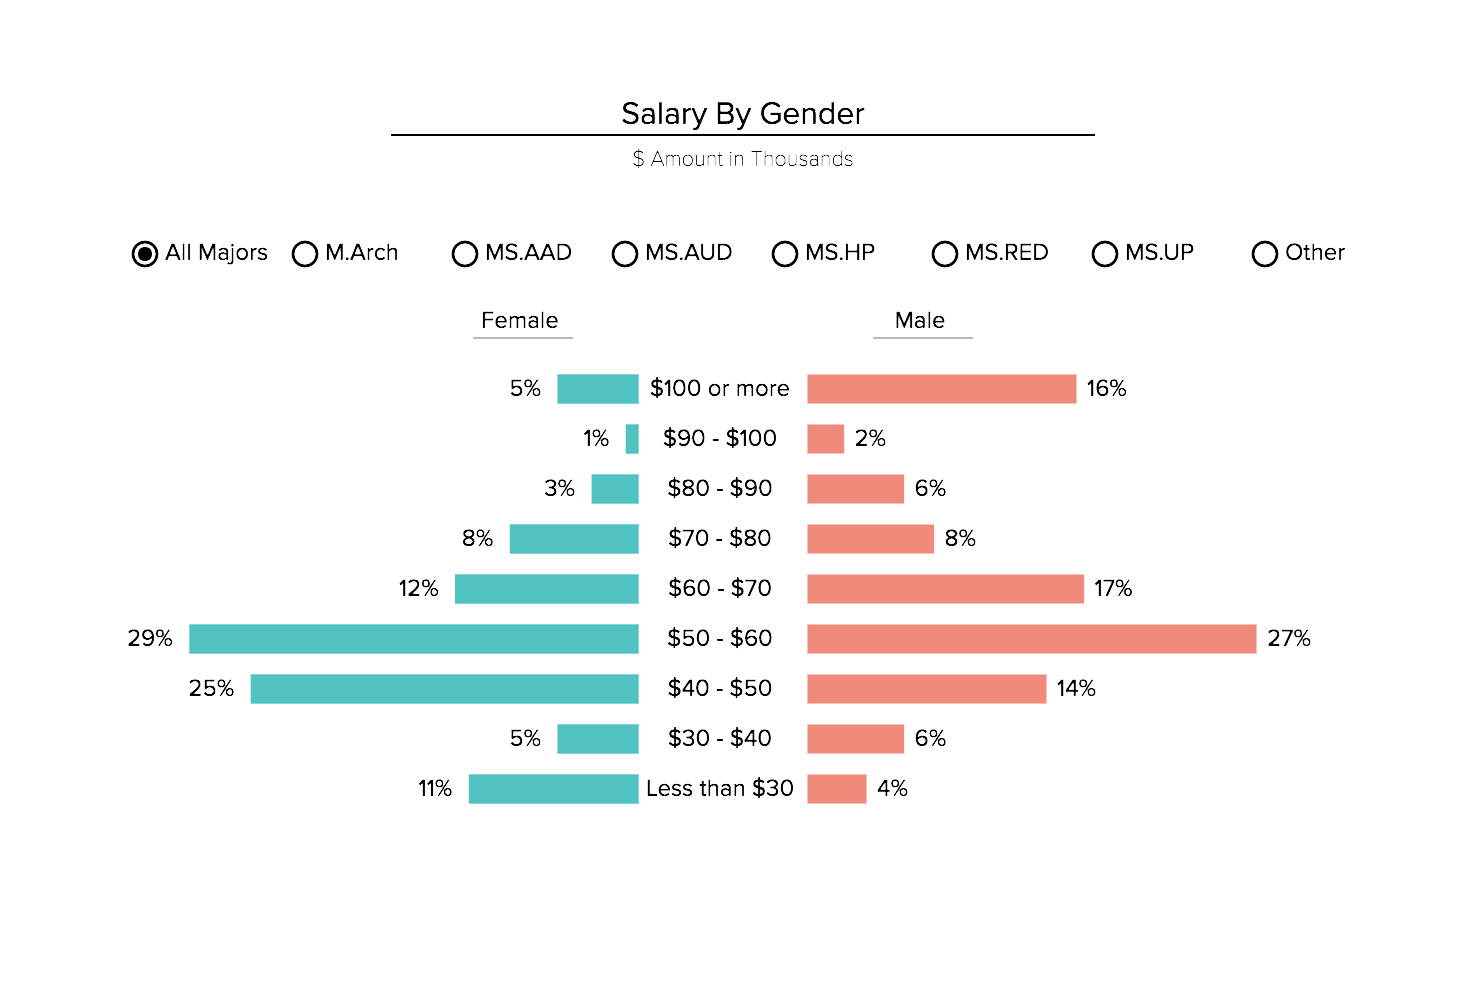 Annual salary by gender